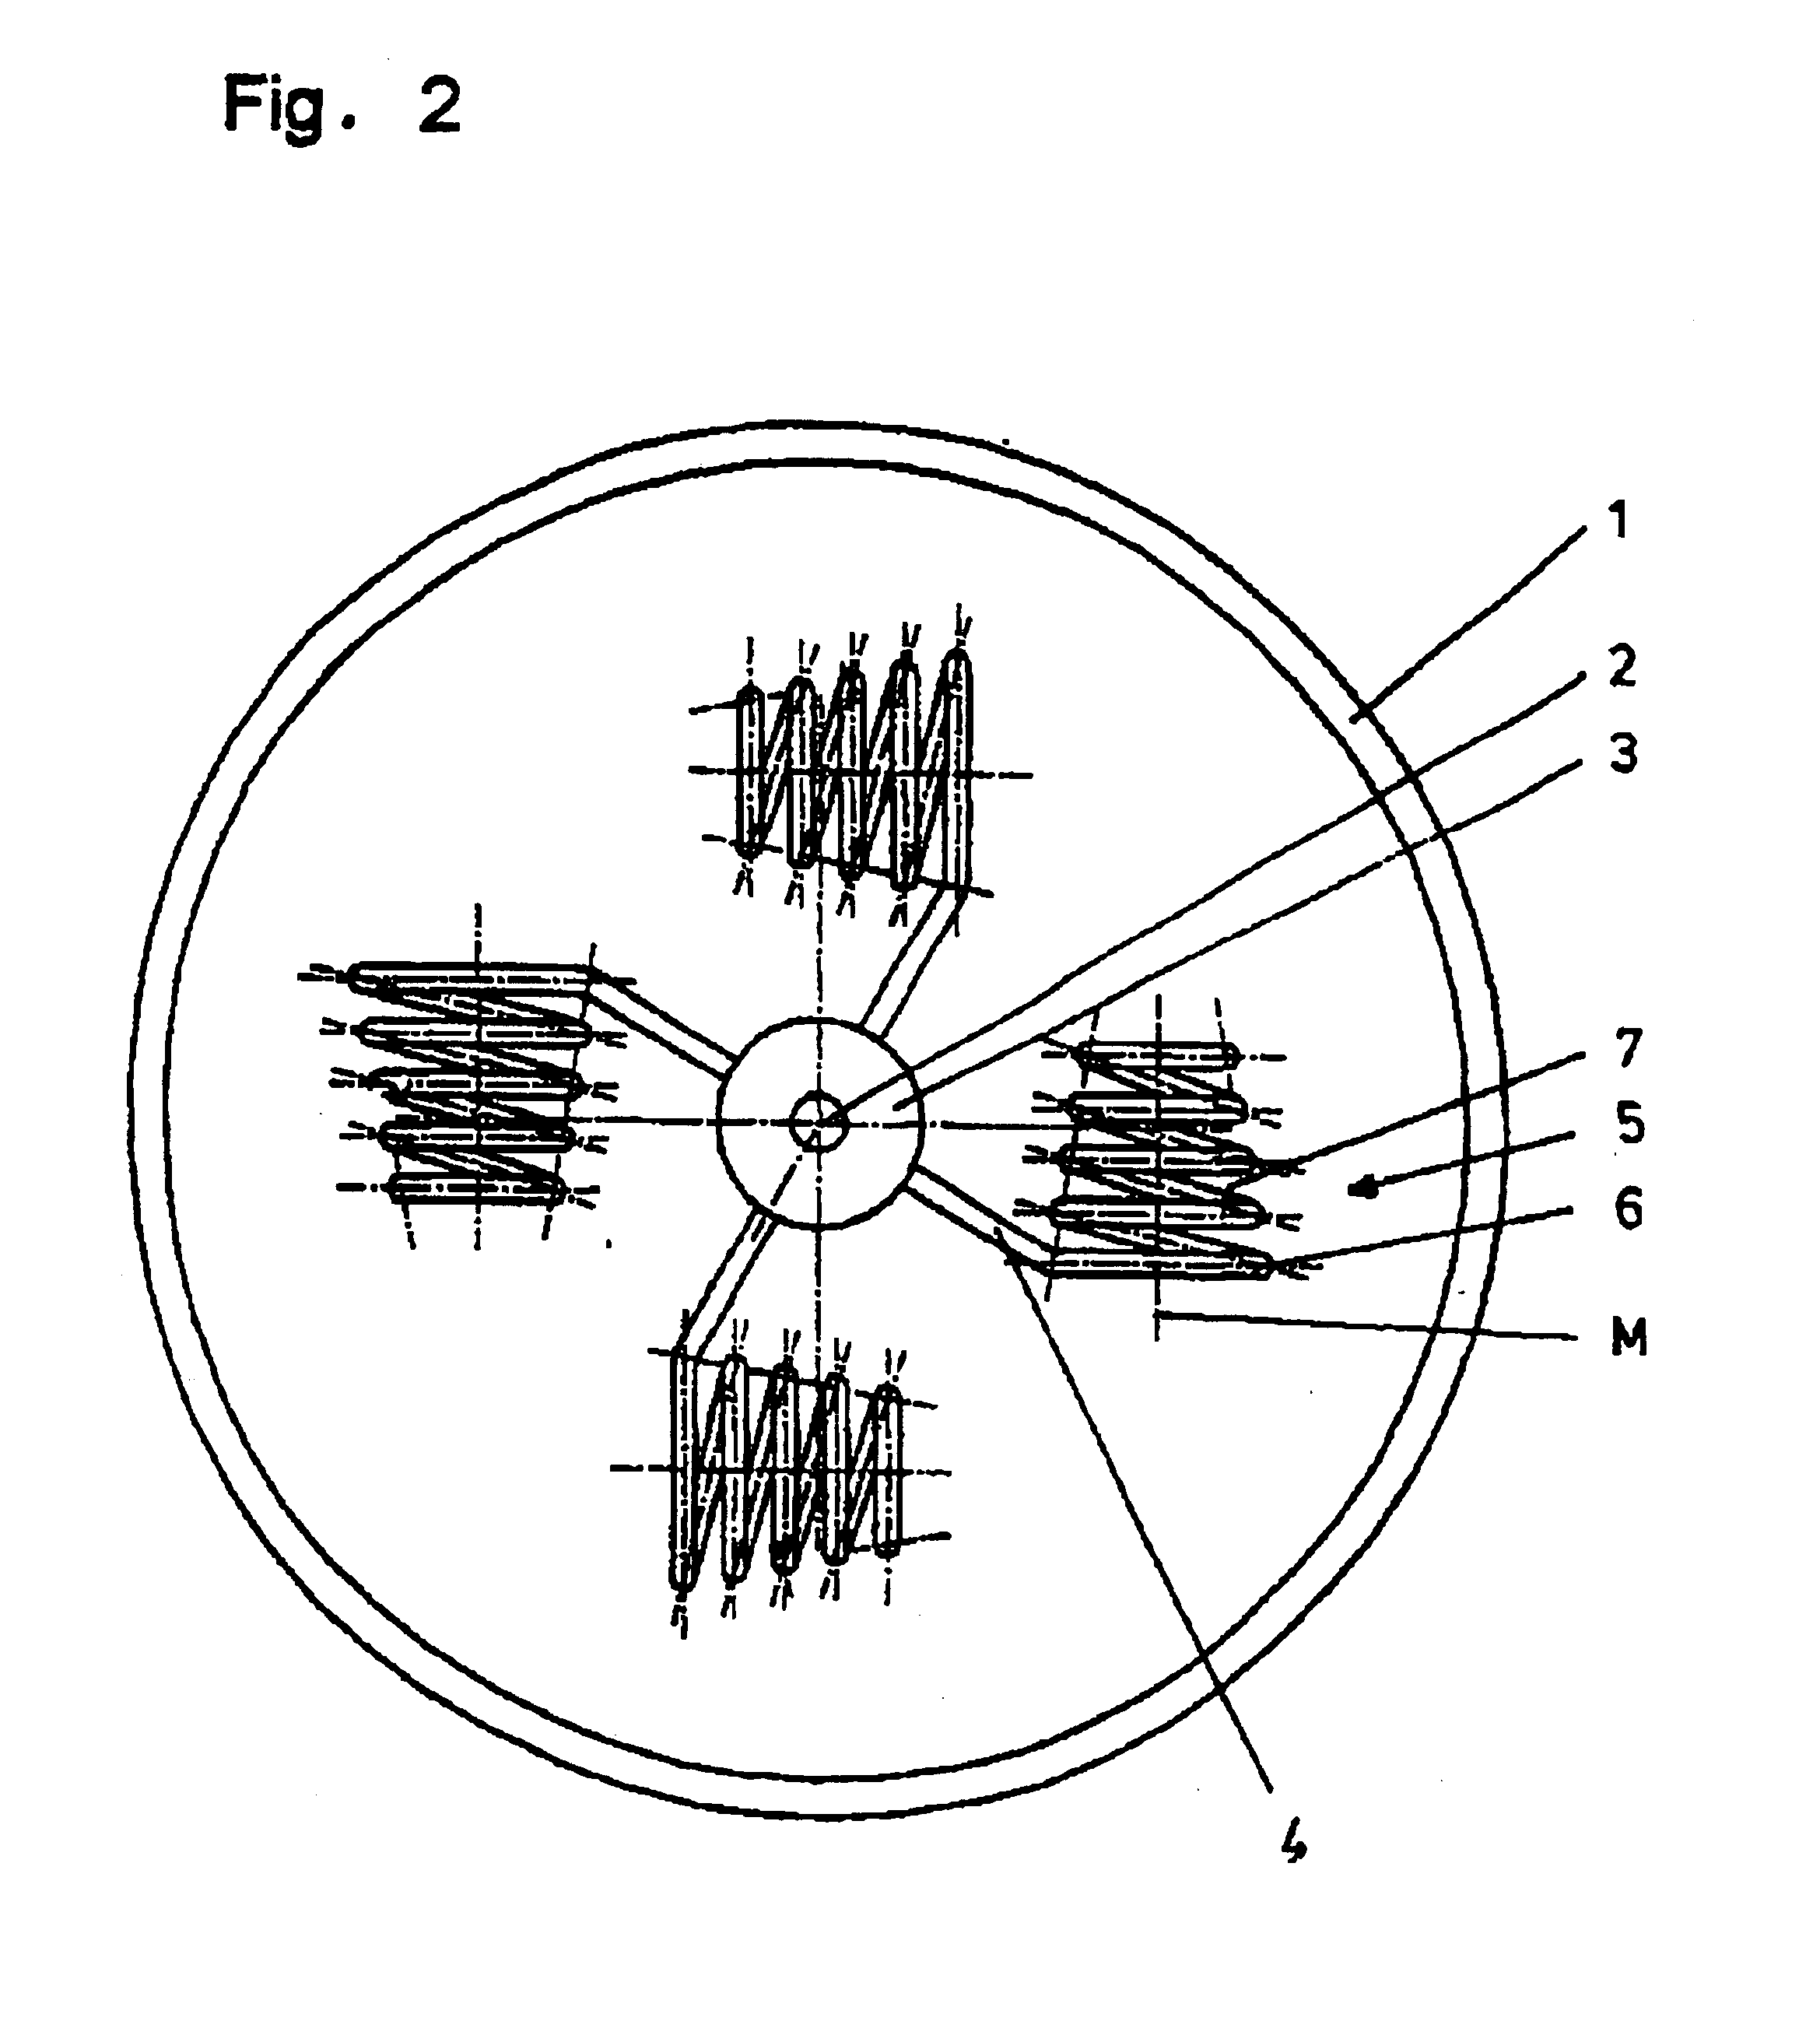 Device for mixing a flowable or pourable medium, especially a highly viscous medium